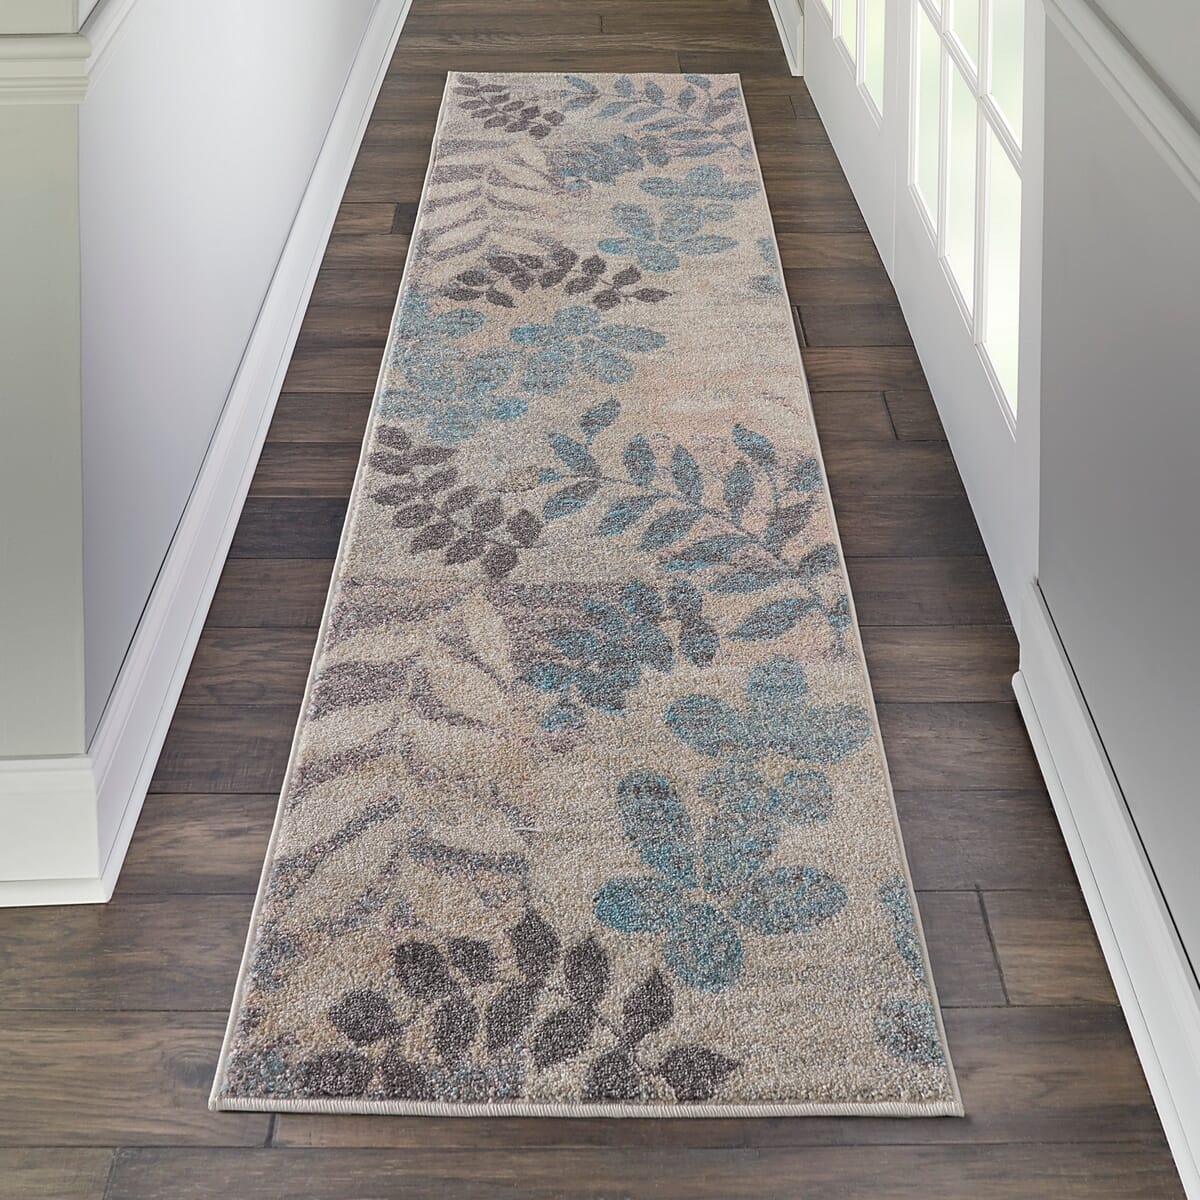 Nourison Tranquil Tra01 Ivory / Light Blue Floral / Country Area Rug